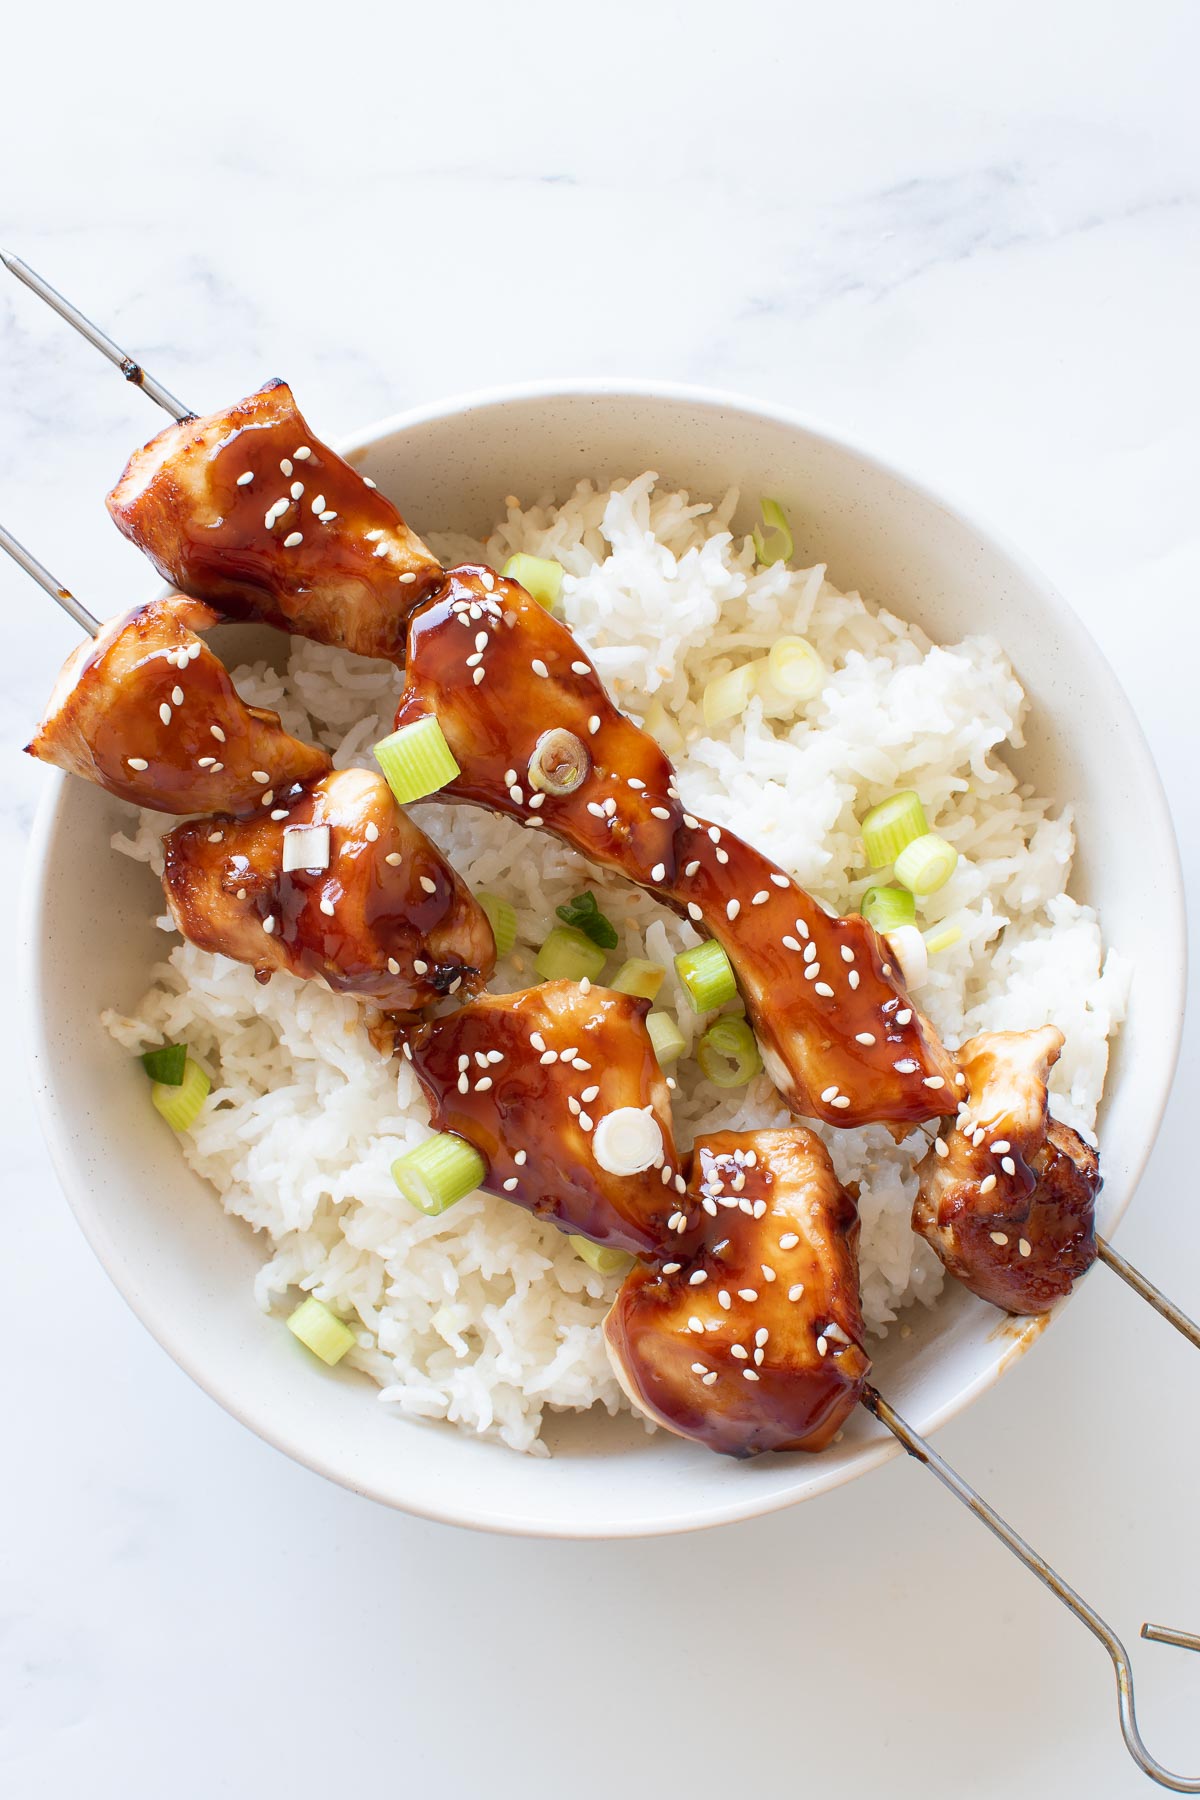 Teriyaki chicken skewers in a bowl with rice.